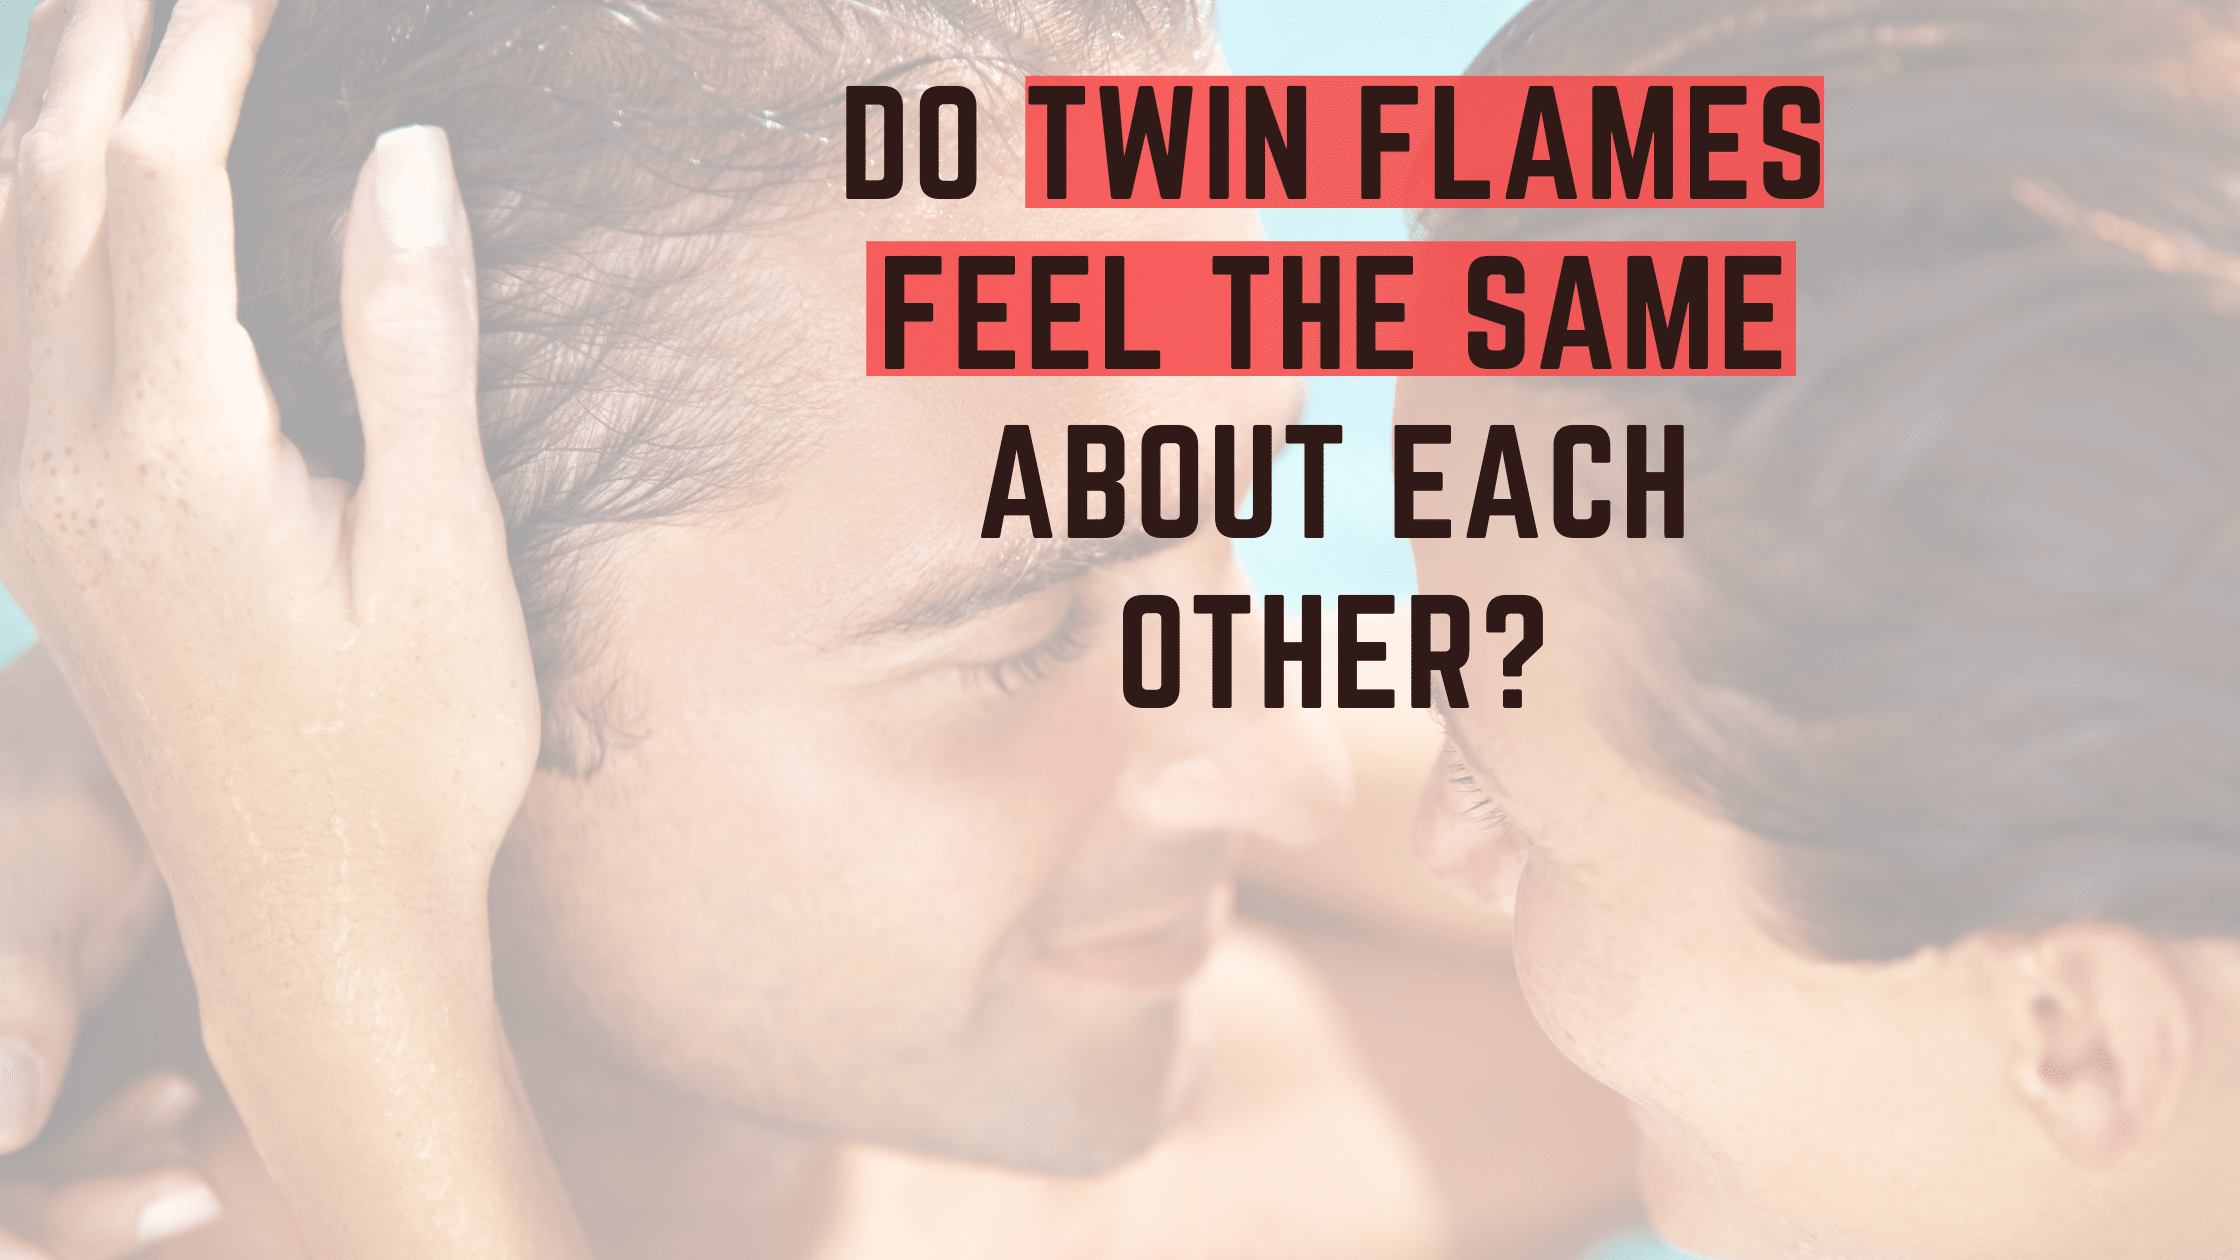 Do Twin Flames Feel the Same about Each Other?